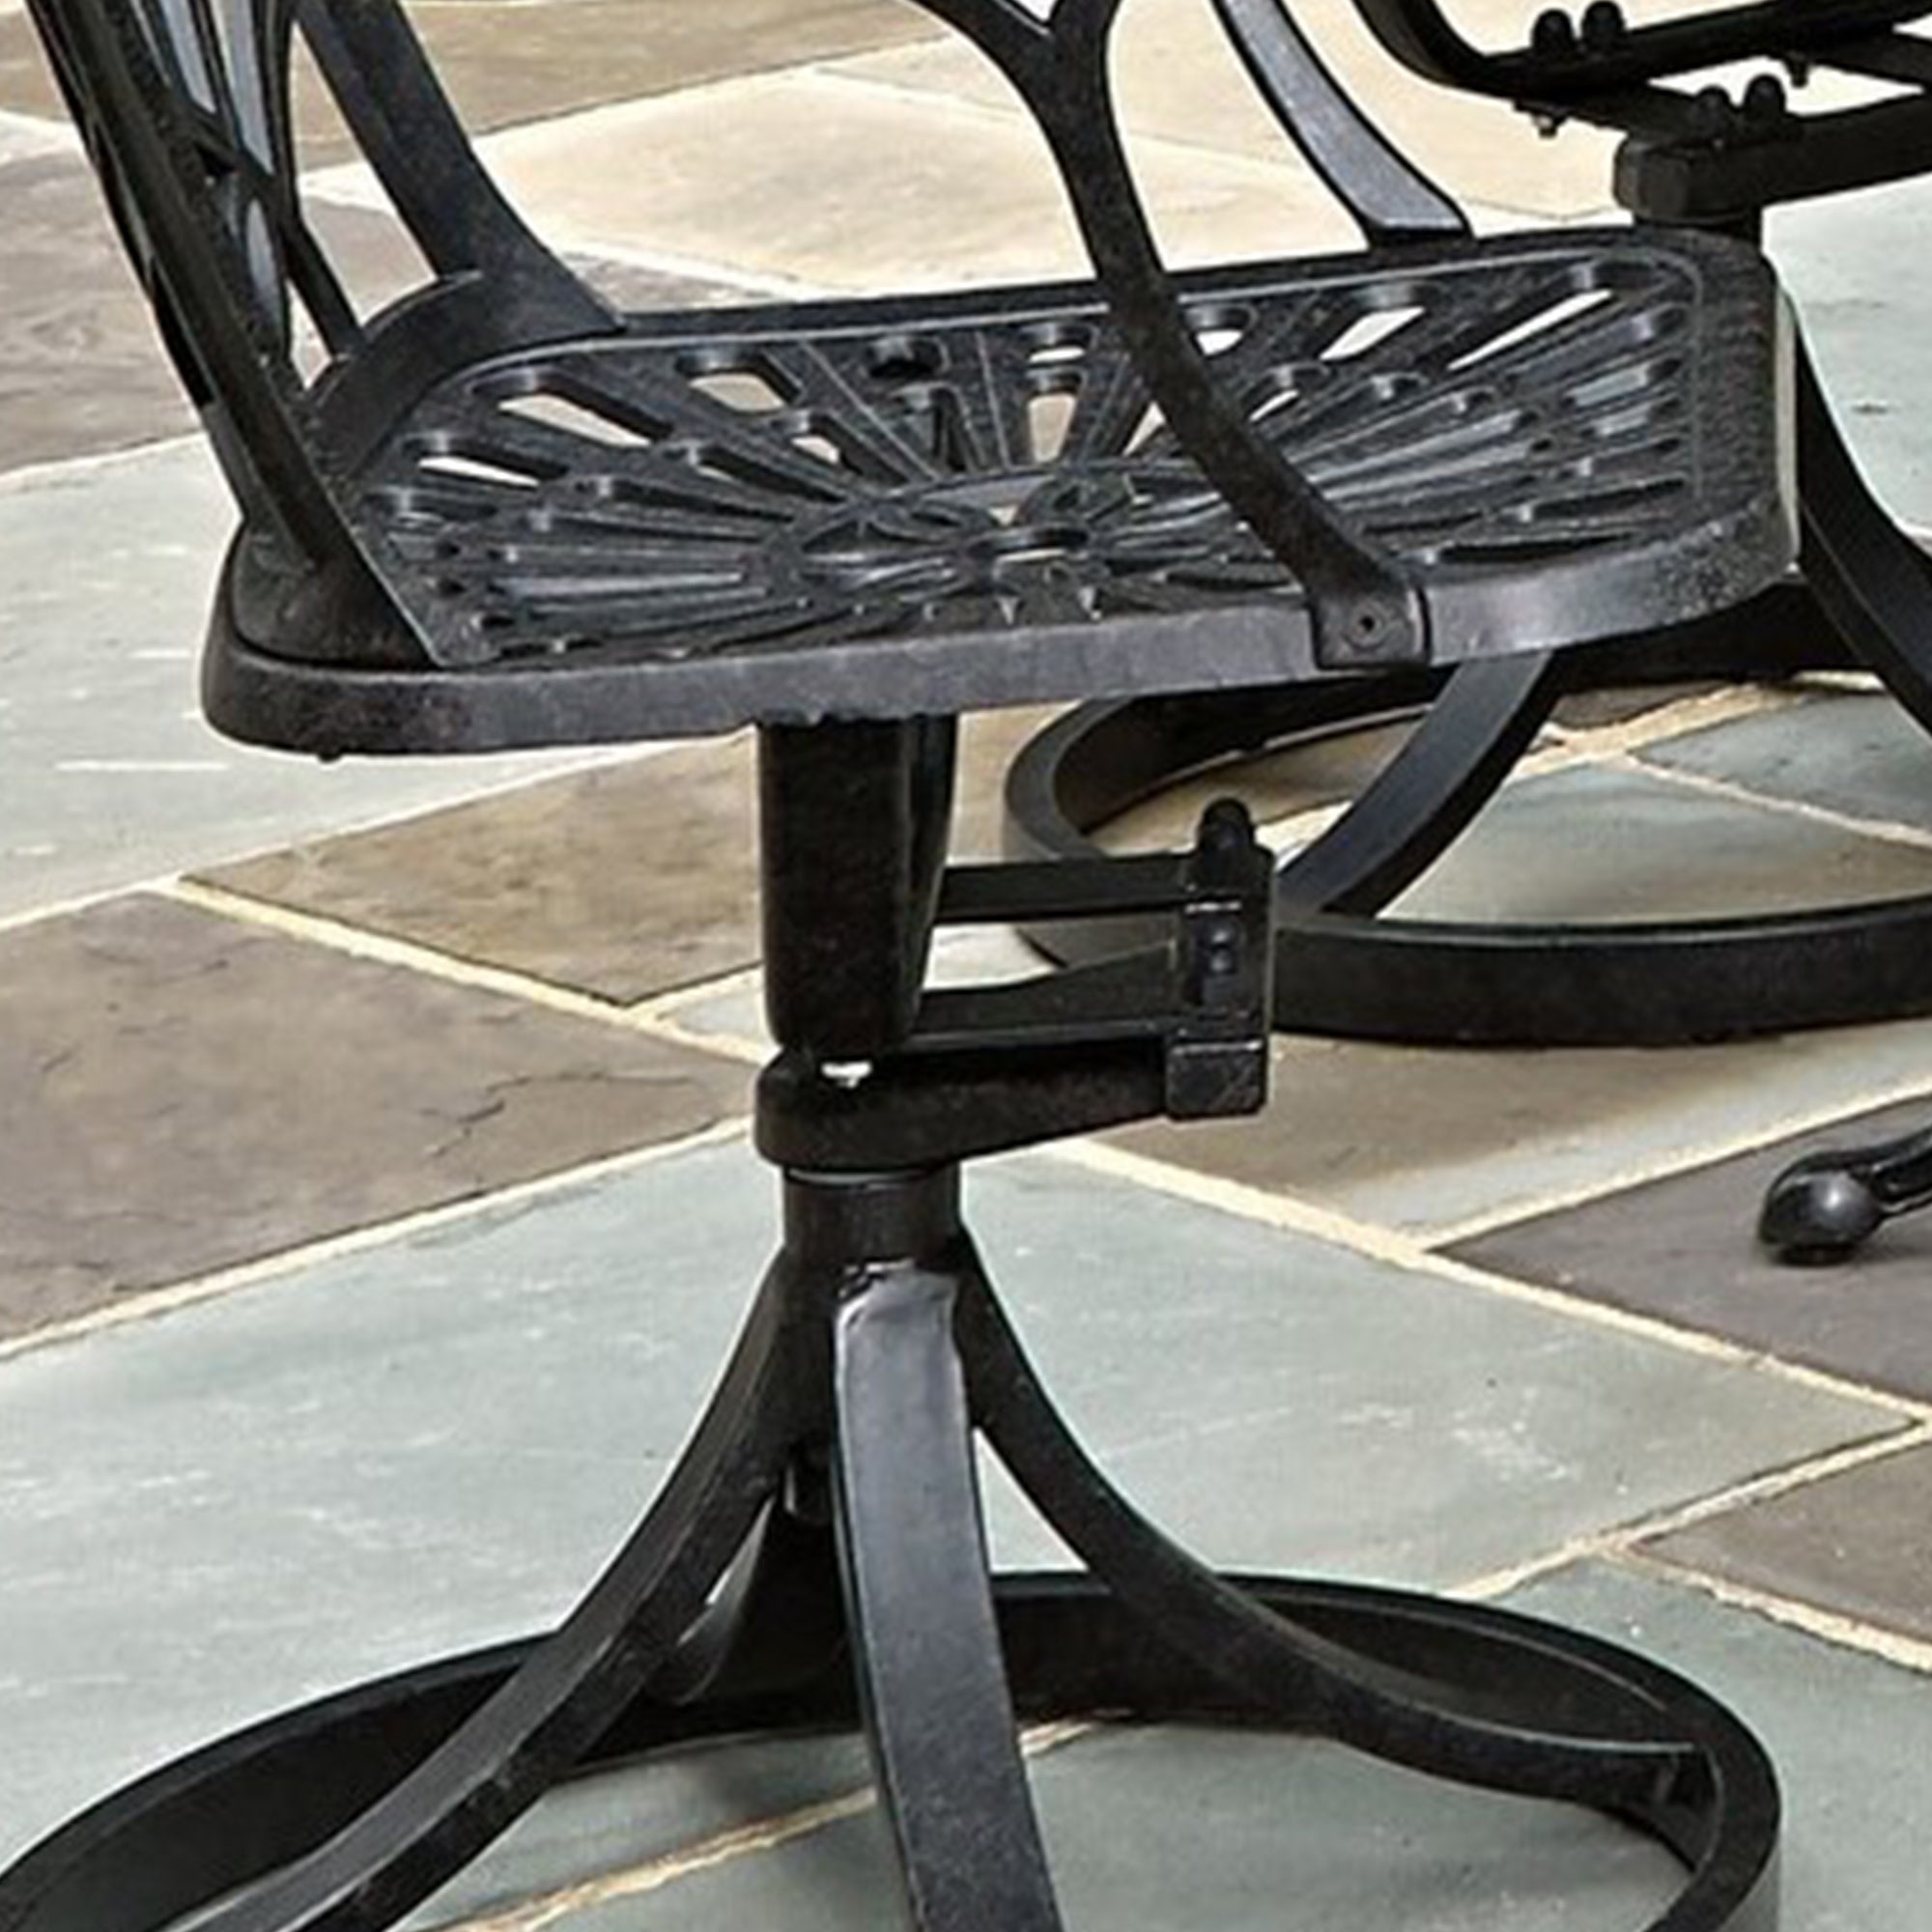 Grenada Outdoor Swivel Rocking Chair by Homestyles - Charcoal - Aluminum - 6660-53